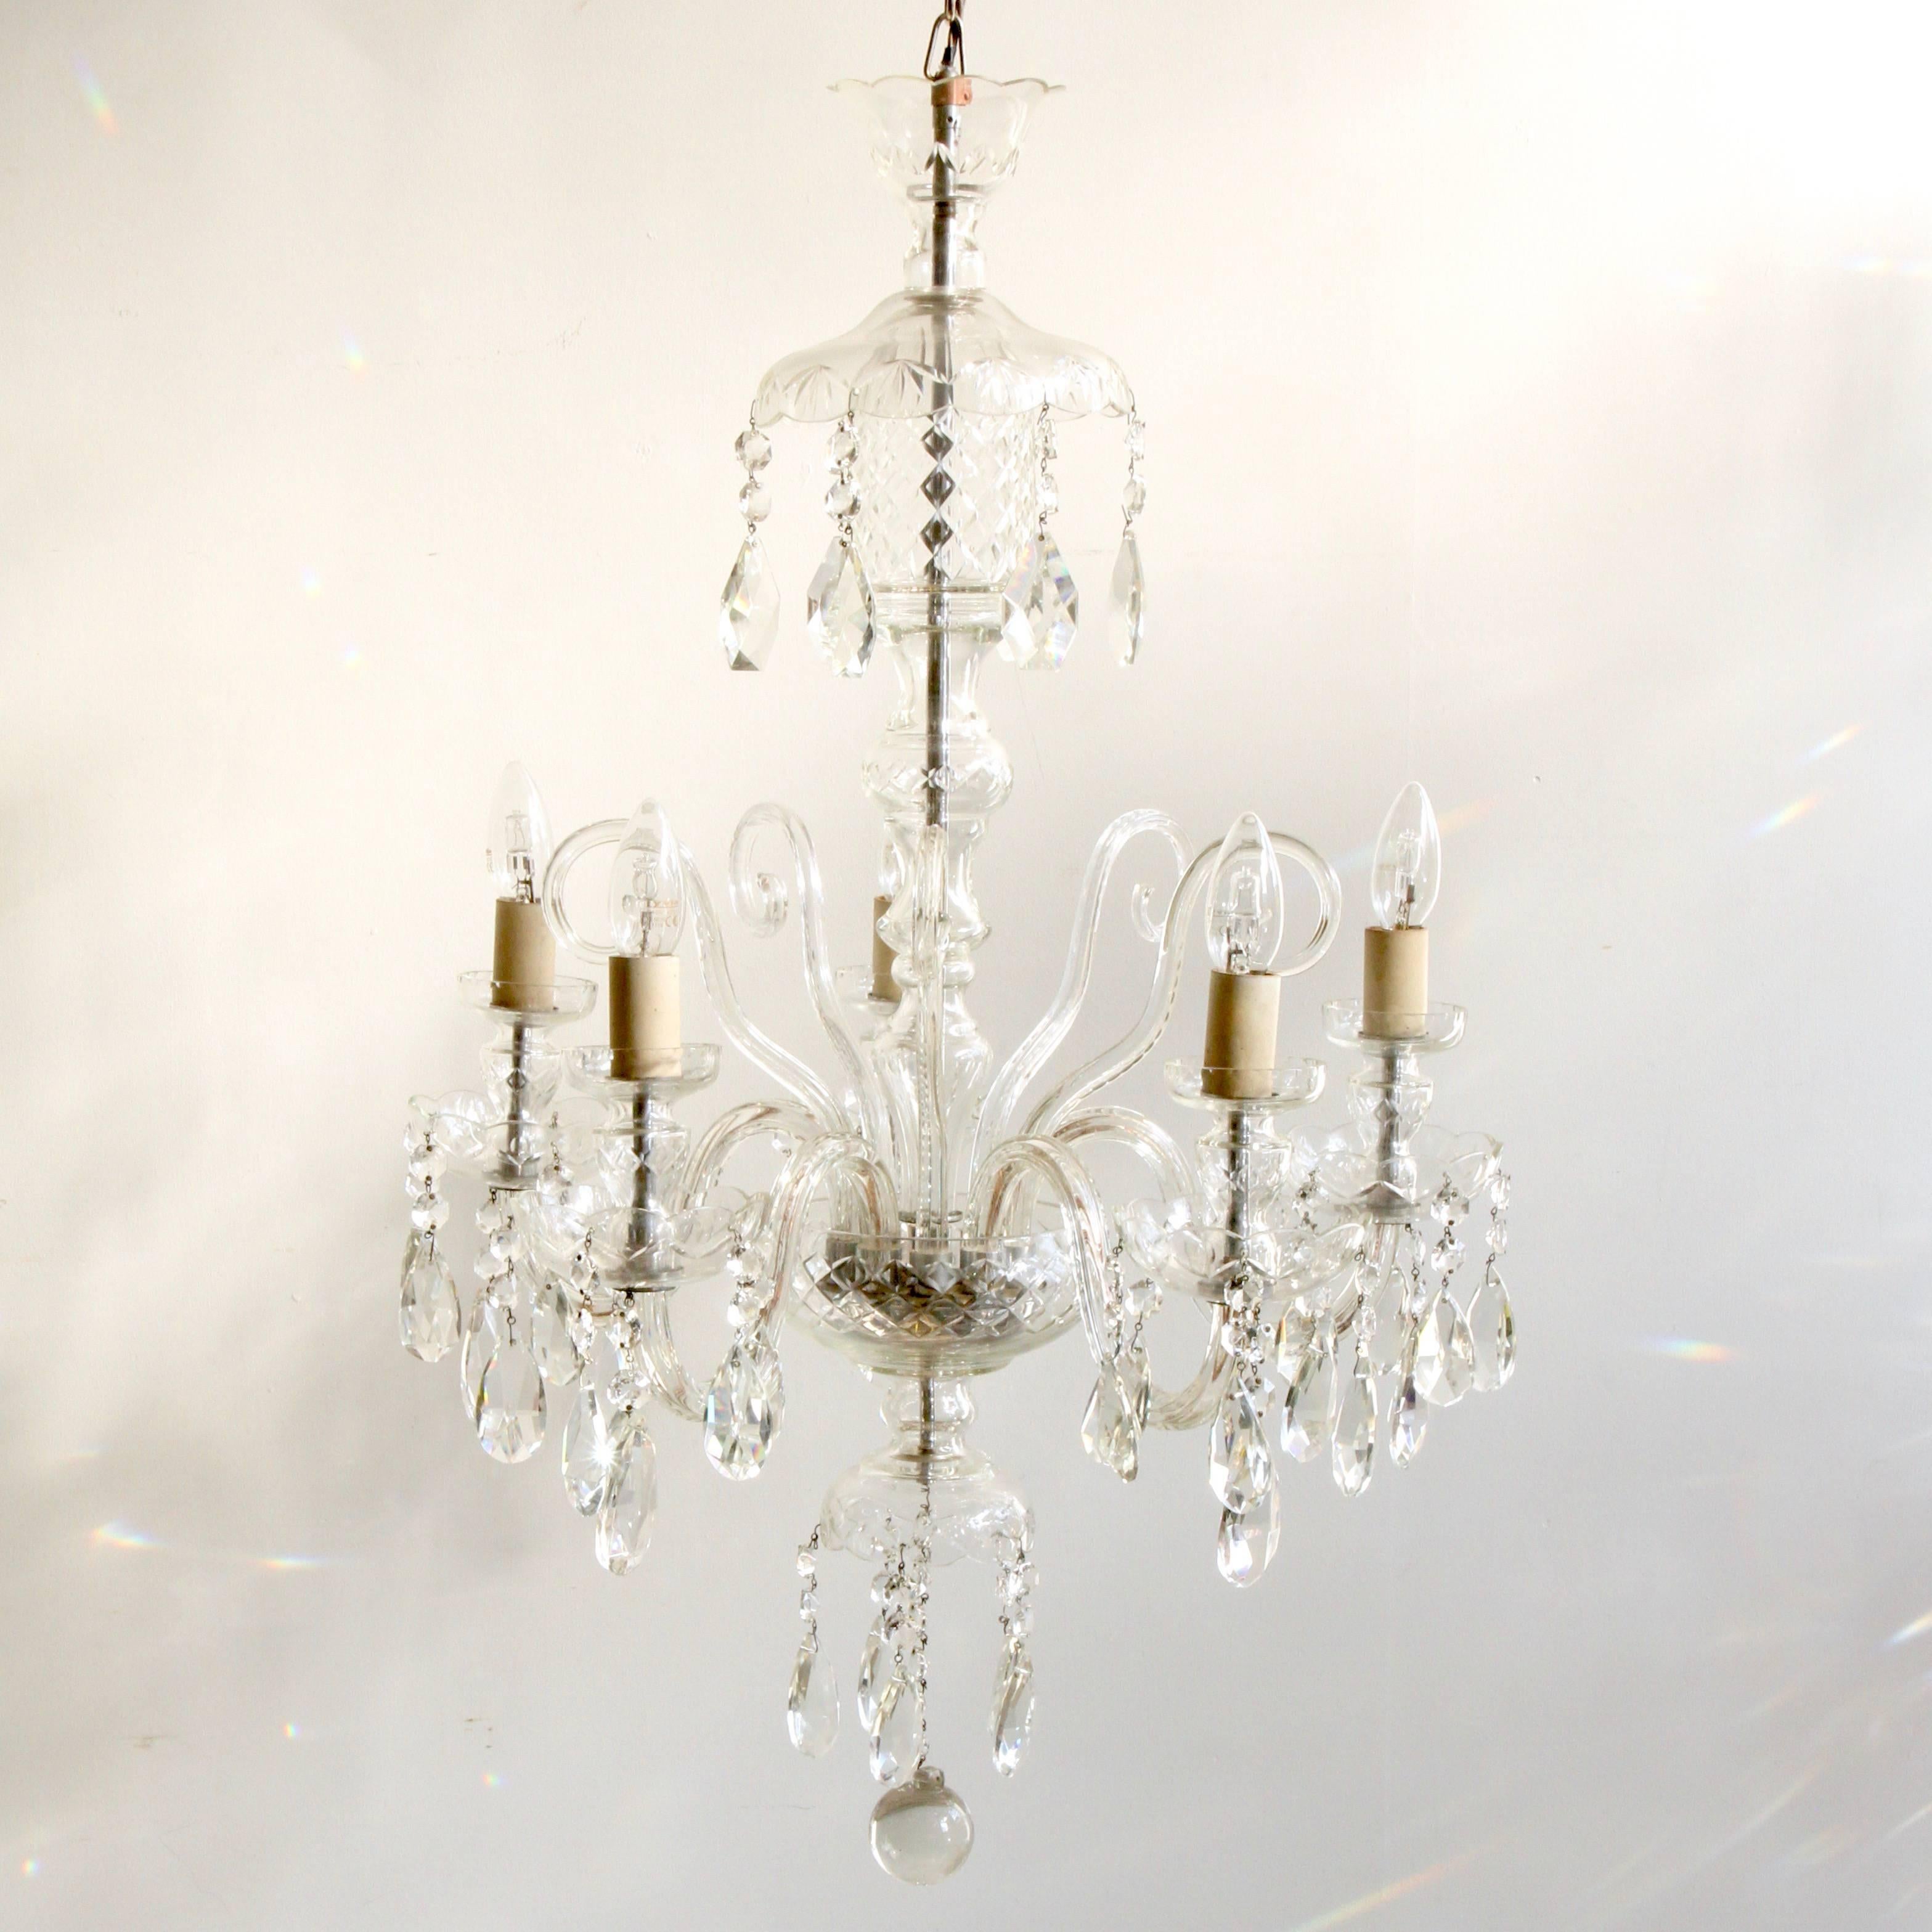 Mid-20th Century 1930s French Large Bohemian Crystal Swan Neck Chandelier with Cut Crystal Drops